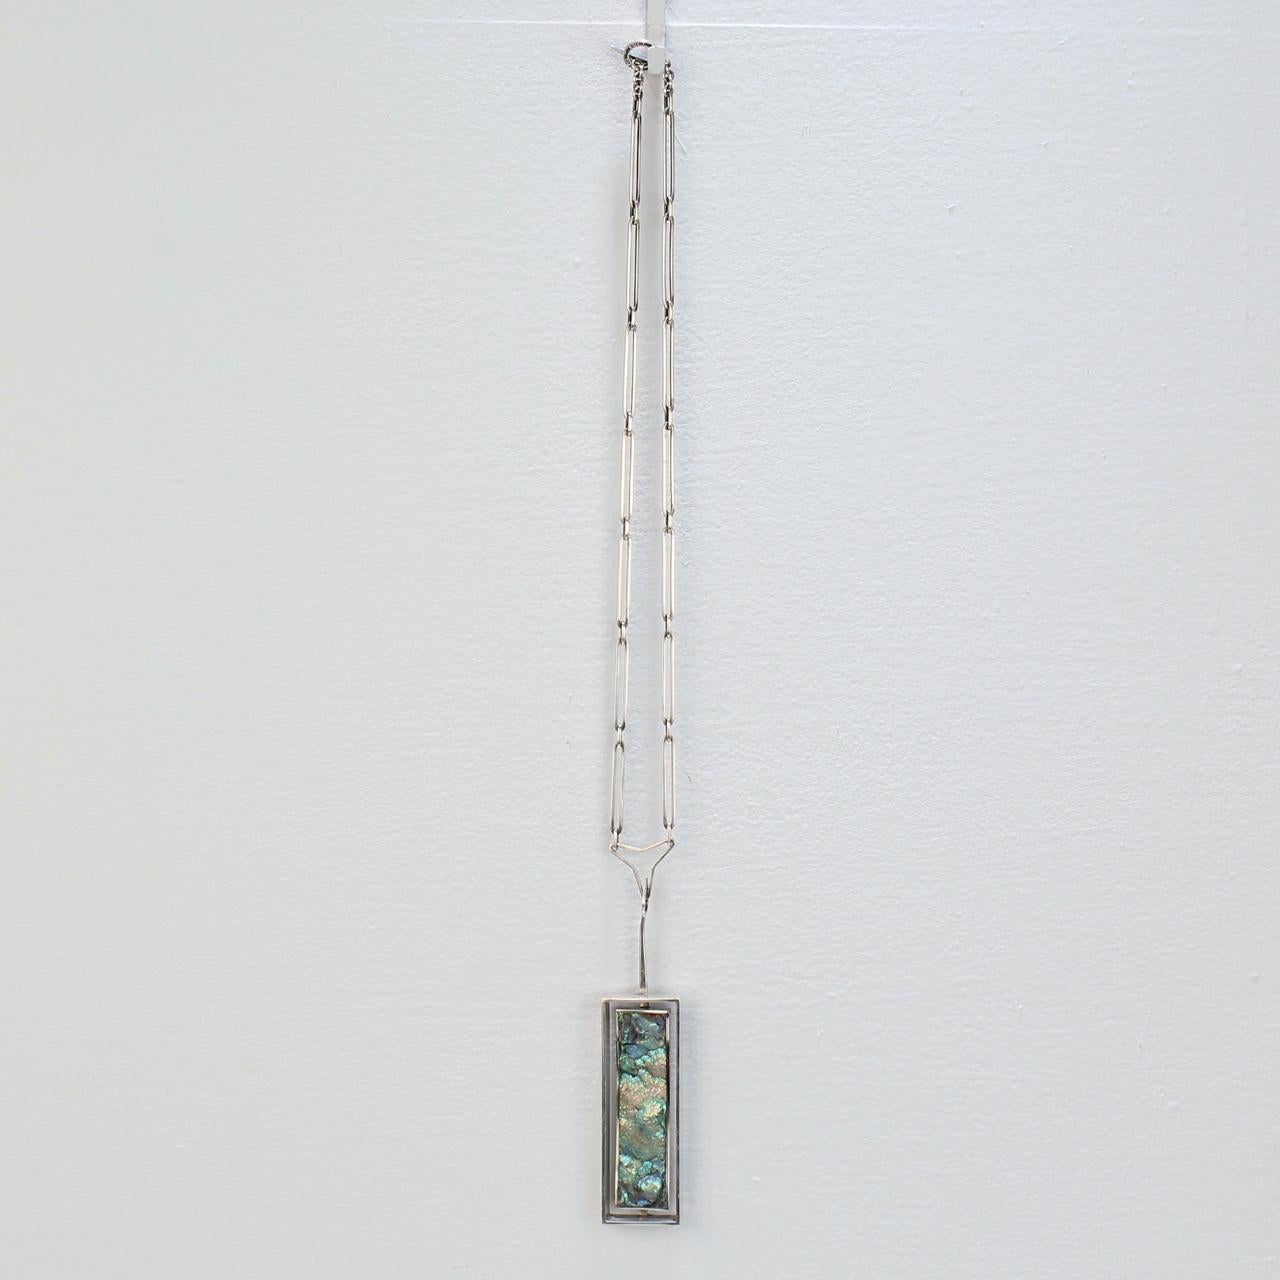 Modernist Danish Modern Sterling Silver & Abalone Shell Pendant Necklace by Palle Bisgaard